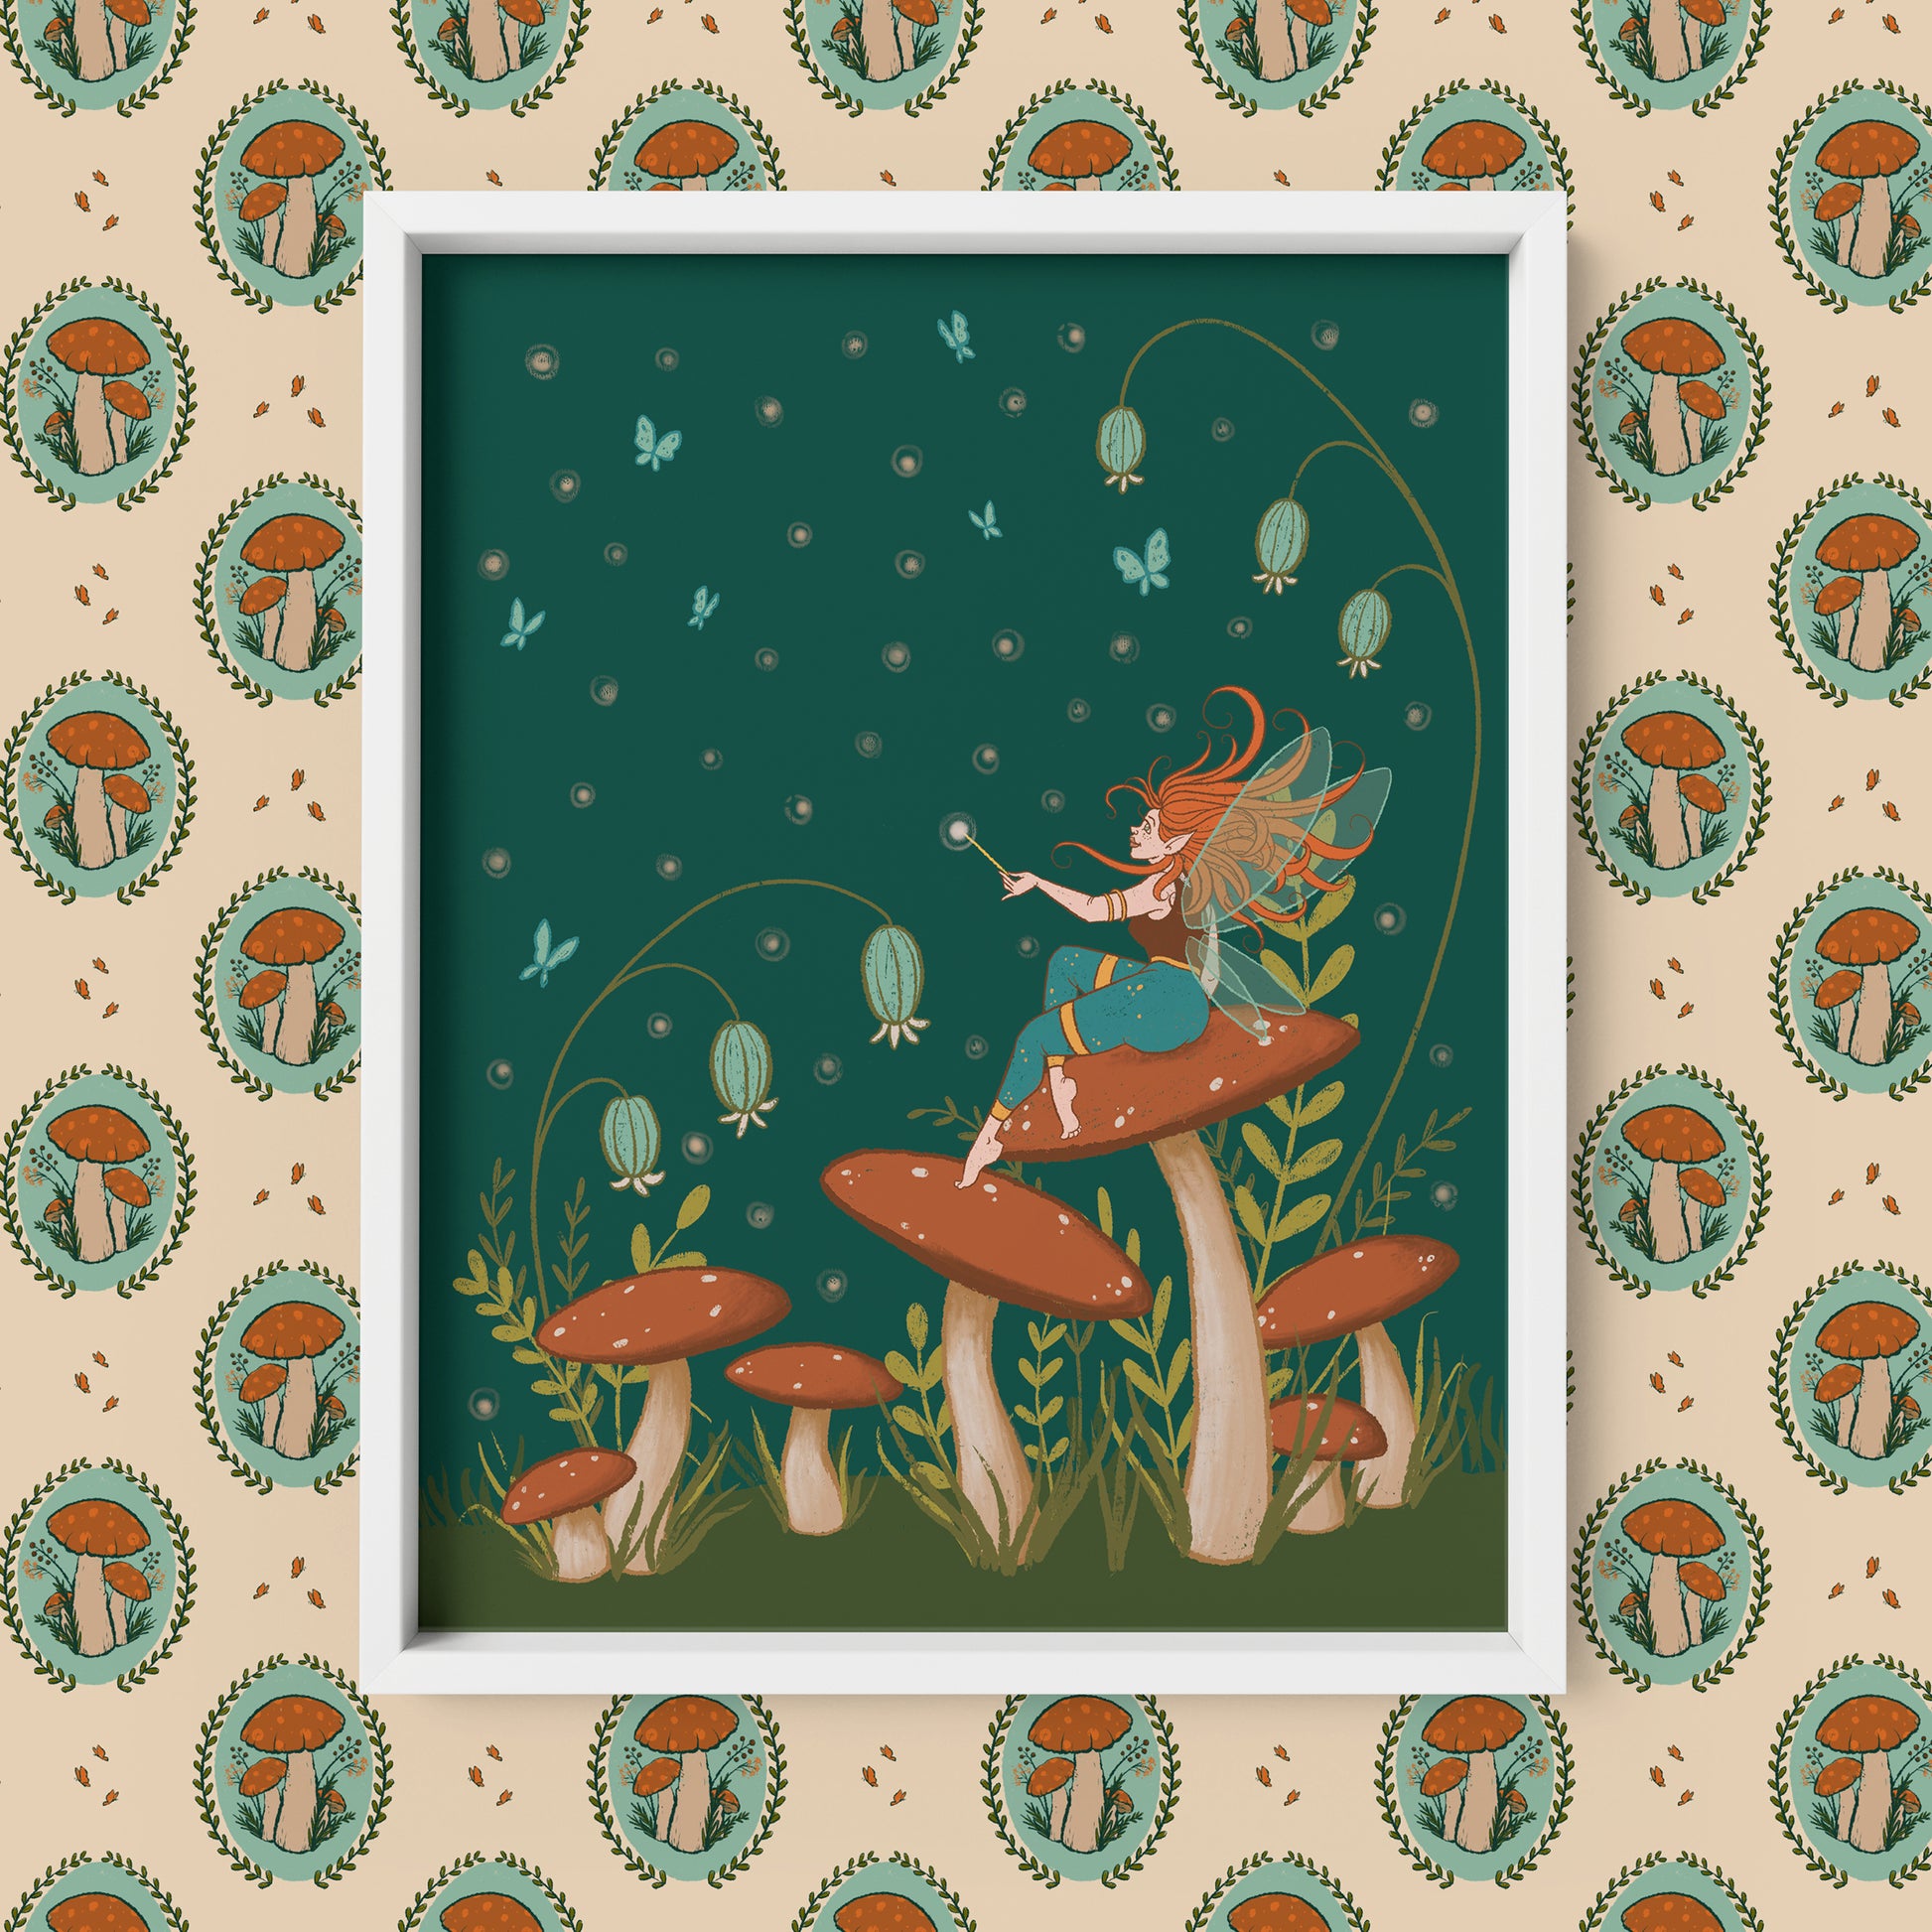 A cottagecore-style illustration shows a winged faerie with turquoise pants sits atop a red-capped mushroom in a field of mushrooms, wildflowers and blue butterflies at night. The print is in a white frame on a patterned background of mushroom cameos.